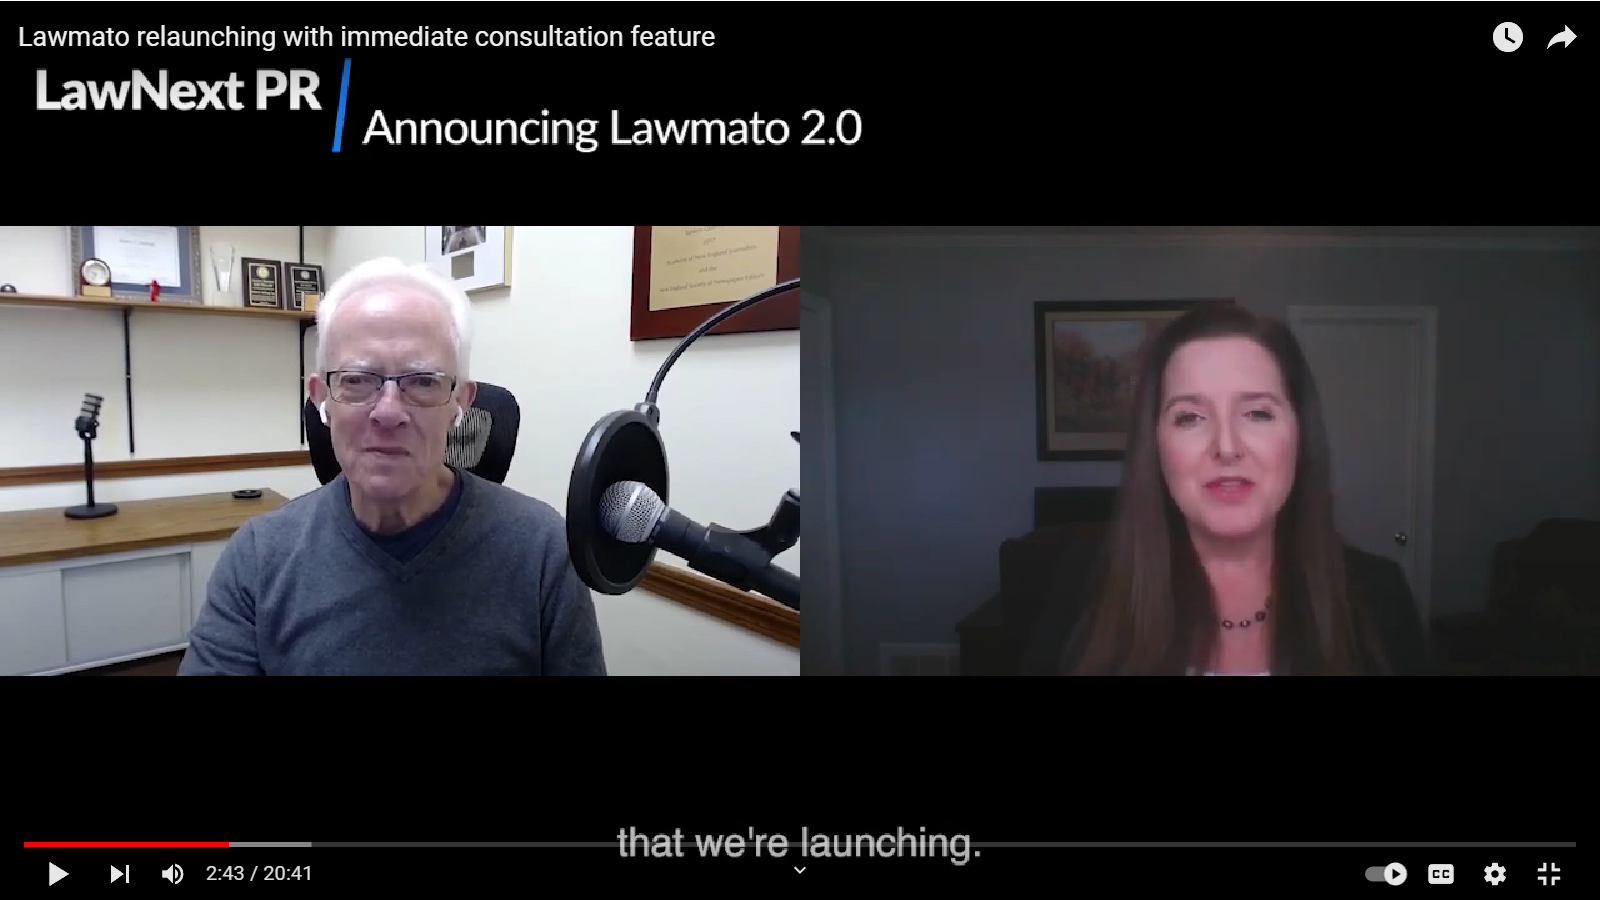 On the LawNext PR Podcast: Legal Tech Startup Lawmato Relaunches with Immediate Consultation Feature